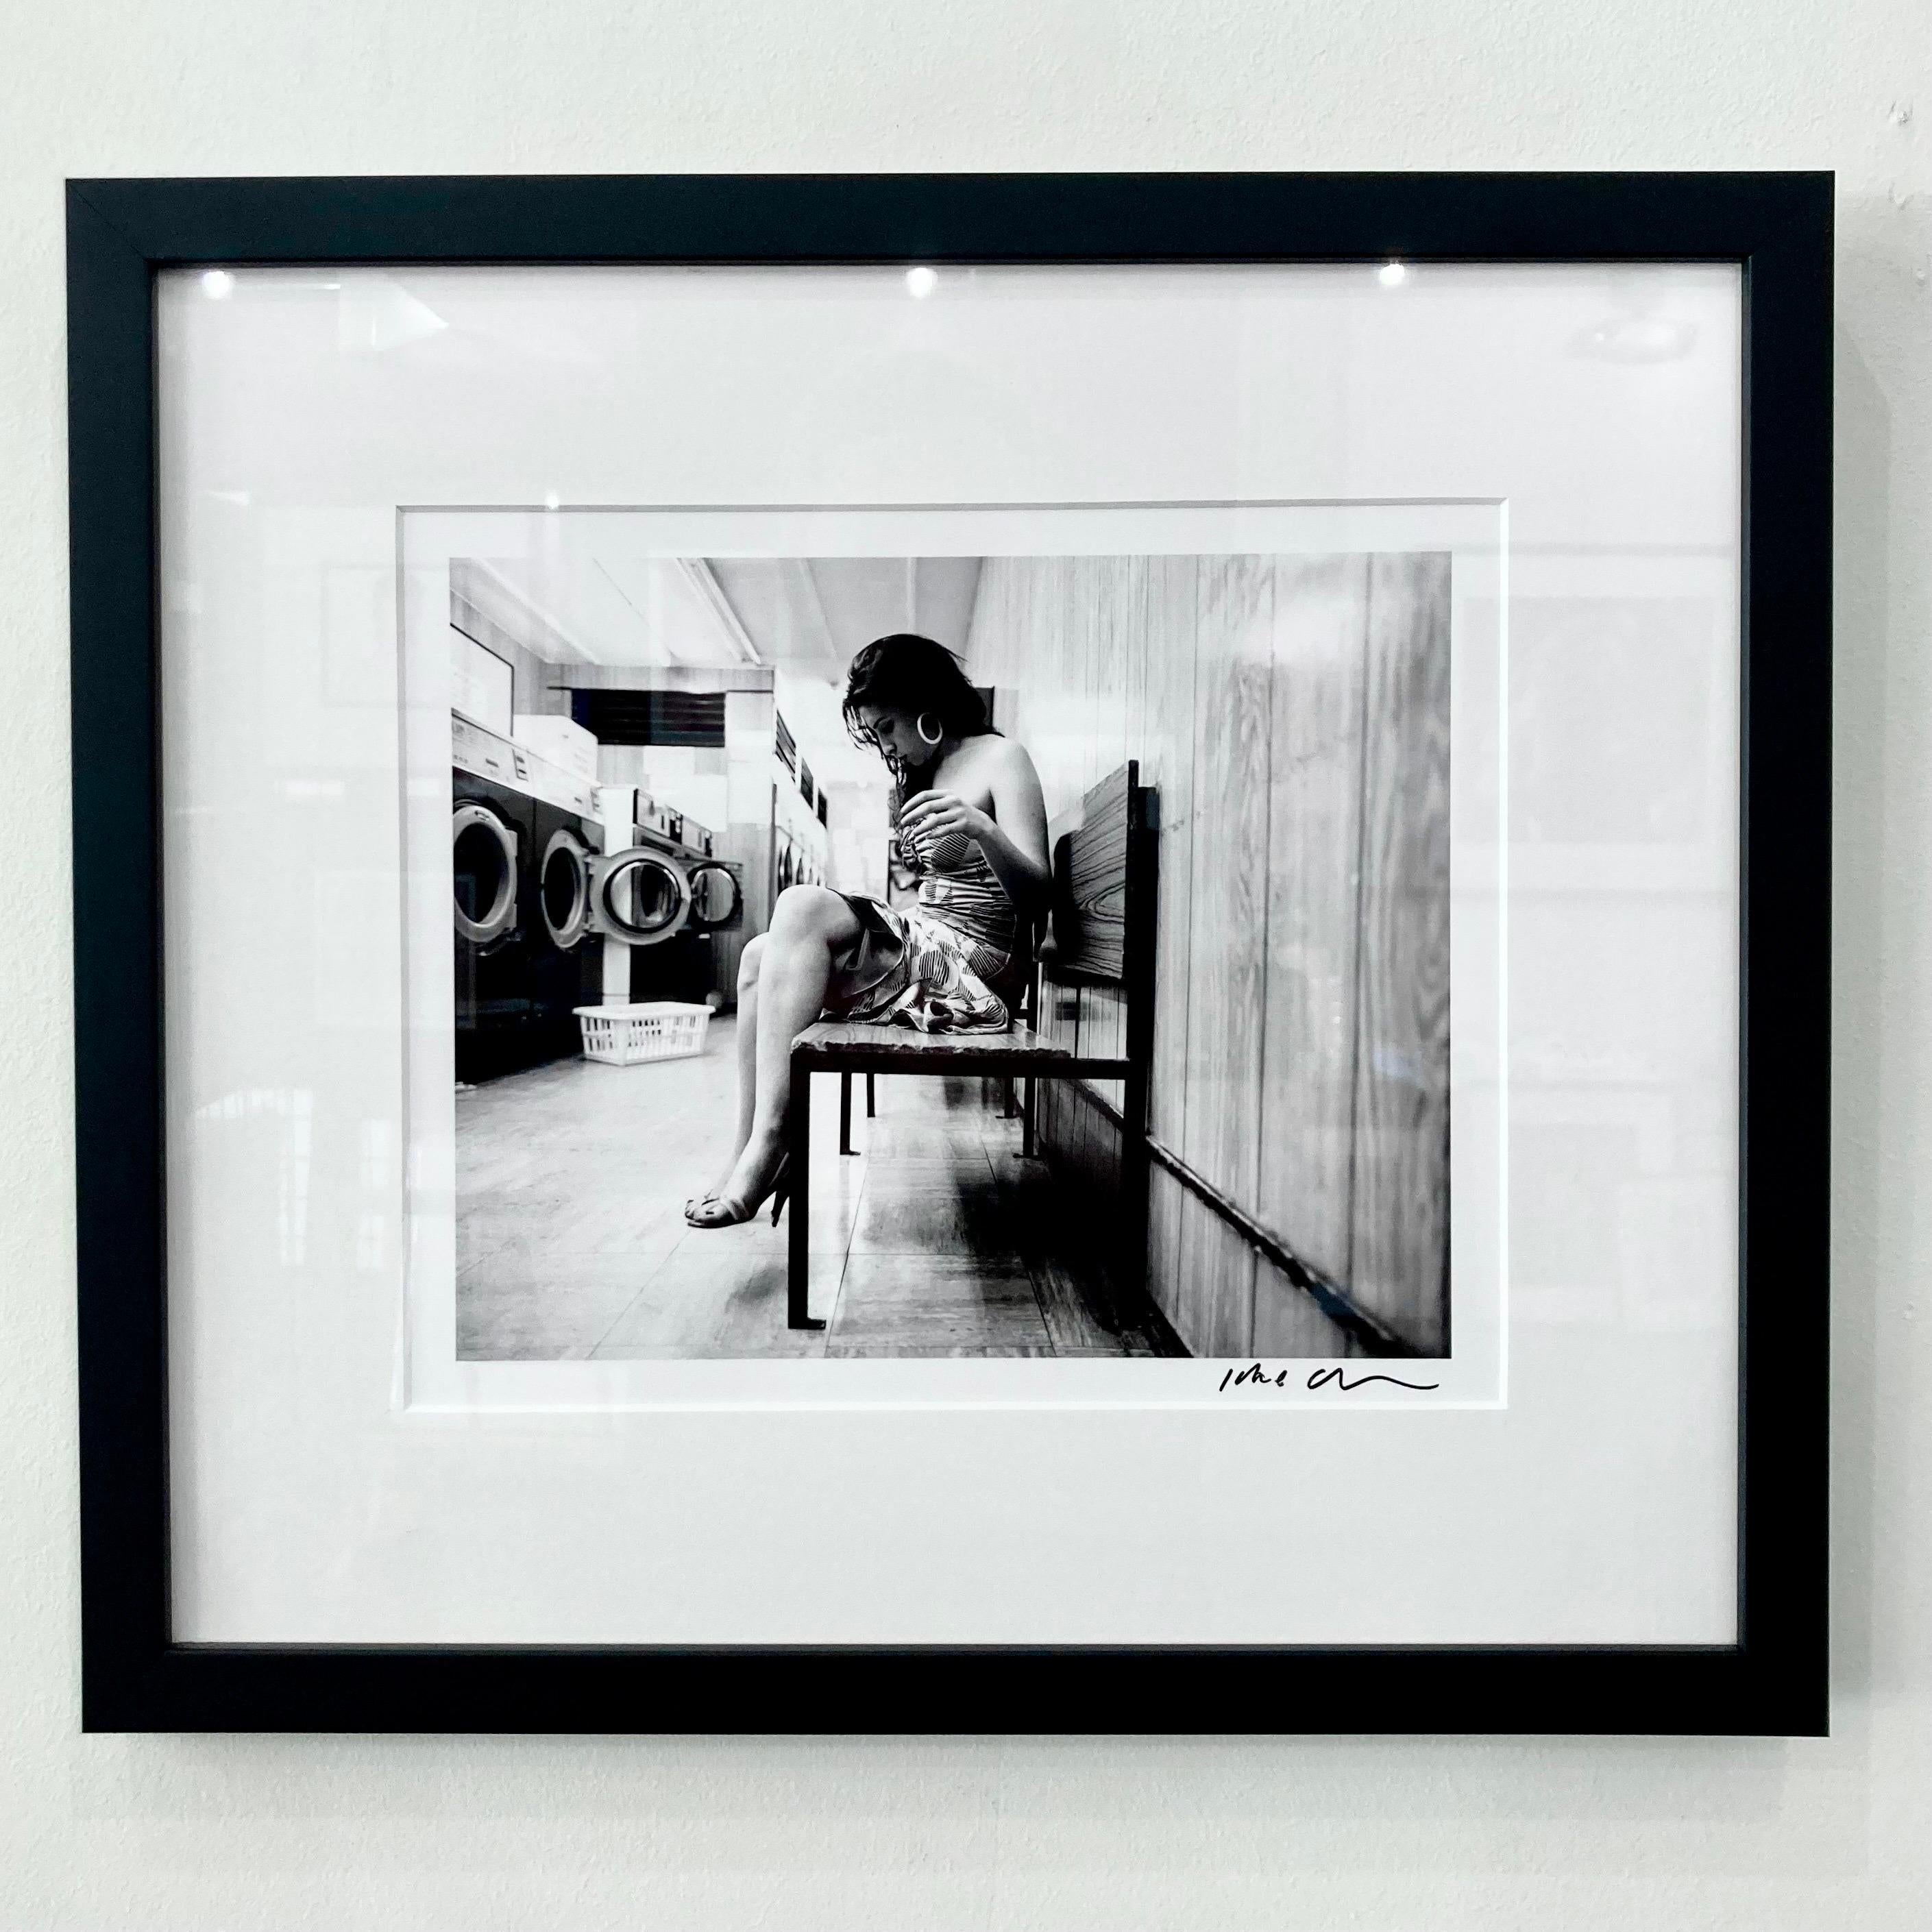 Amy Winehouse at the laundromat by Jake Chessum framed 9x12